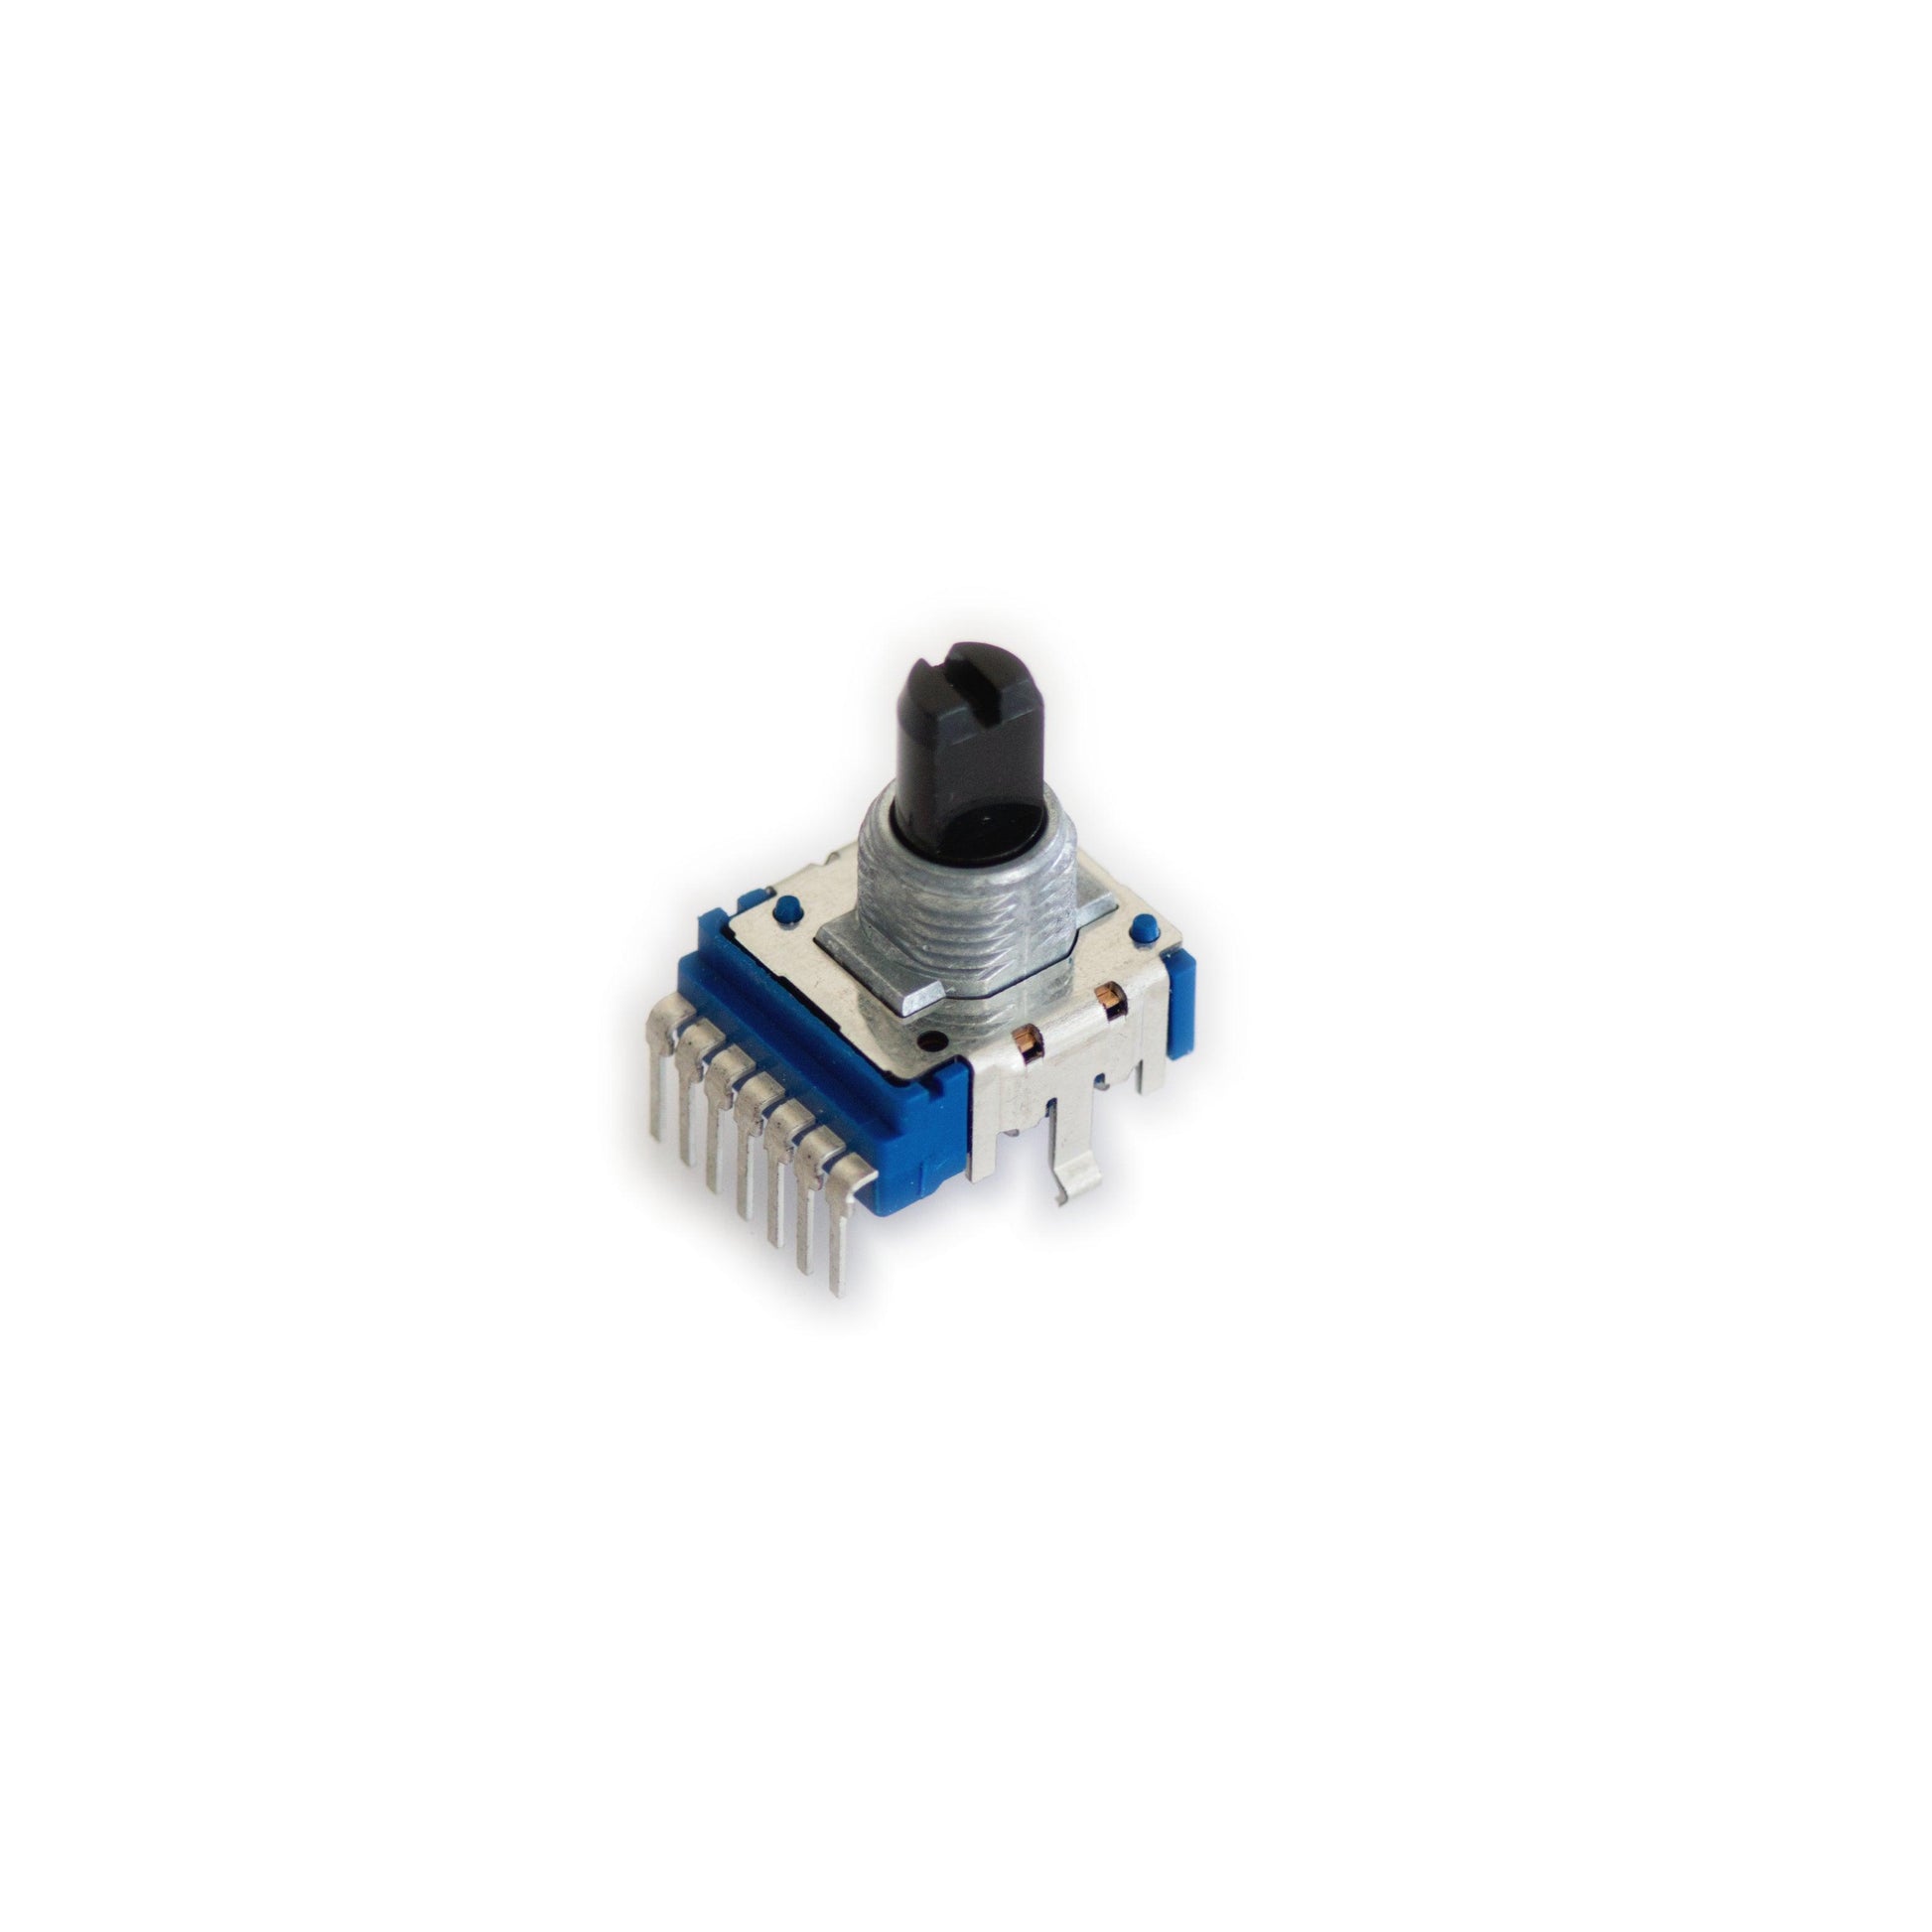 Boss - DR-660 , DR-770 - Rotary potentiometer - synthesizer-parts.com